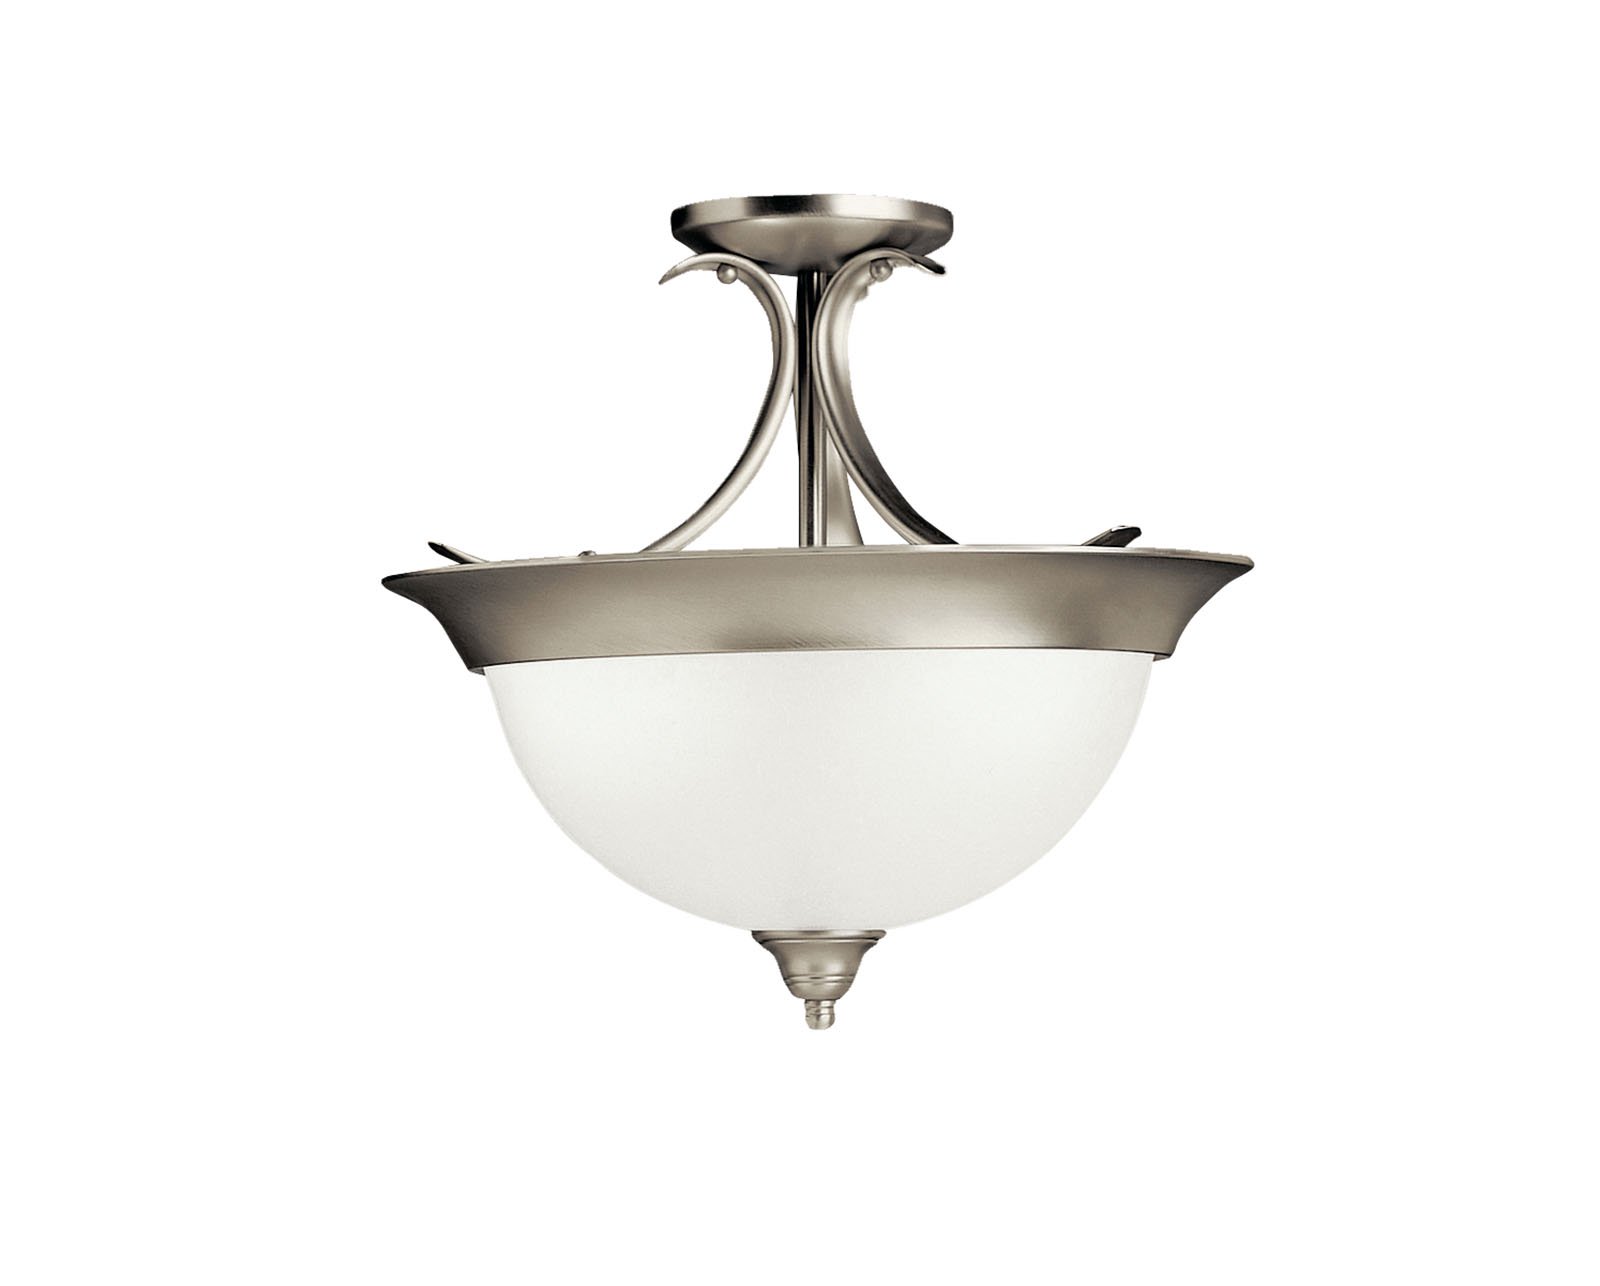 The Dover(TM) Collection takes classic design and offers its own unique, modern twist. Characterized by its sweeping arms, Dover(TM) fixtures offer a clean look while remaining fresh and exciting. With our Brushed Nickel finish over its hand-wrought steel frame, you can be sure of a high quality fit and finish that is second to none. This 3 light Dover(TM) Semi-Flush uses 60-watt (max.) bulbs for everyday lighting. With its etched seedy glass base, this fixture brings a timeless design into any room. It measures 15.5in. in diameter with a 14in. body height.